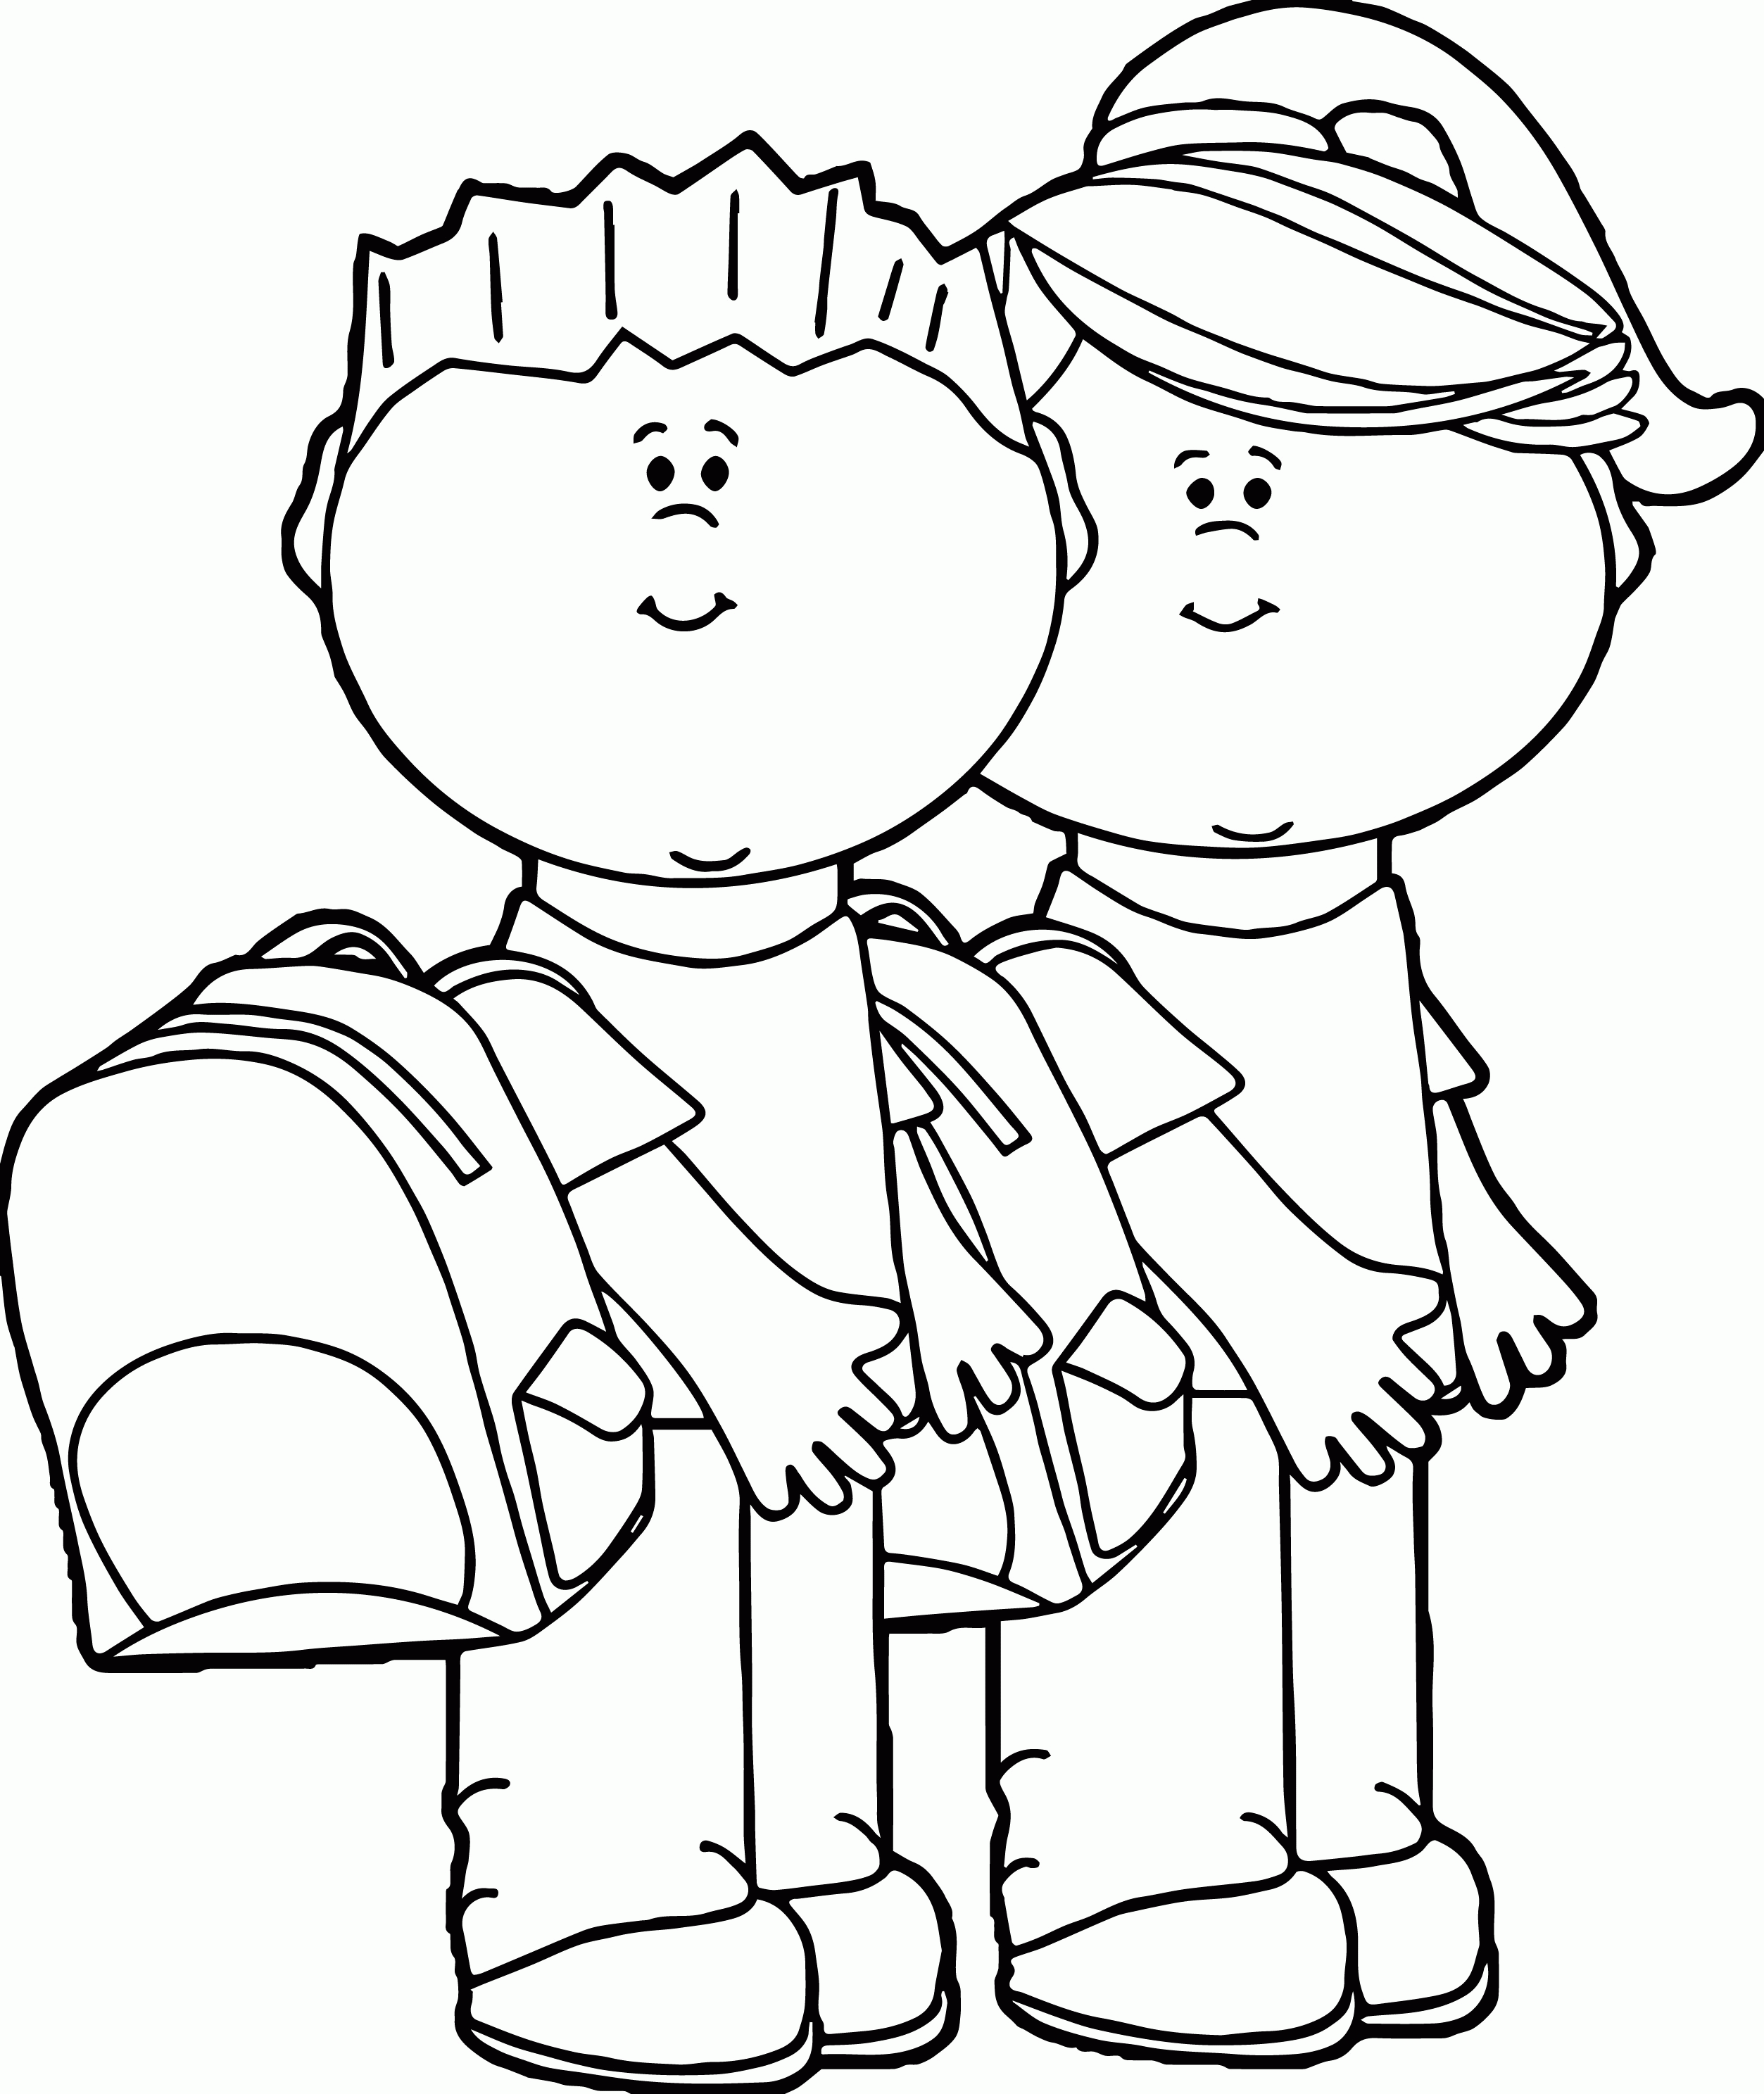 Kids Going To School Kids We Coloring Page | Wecoloringpage